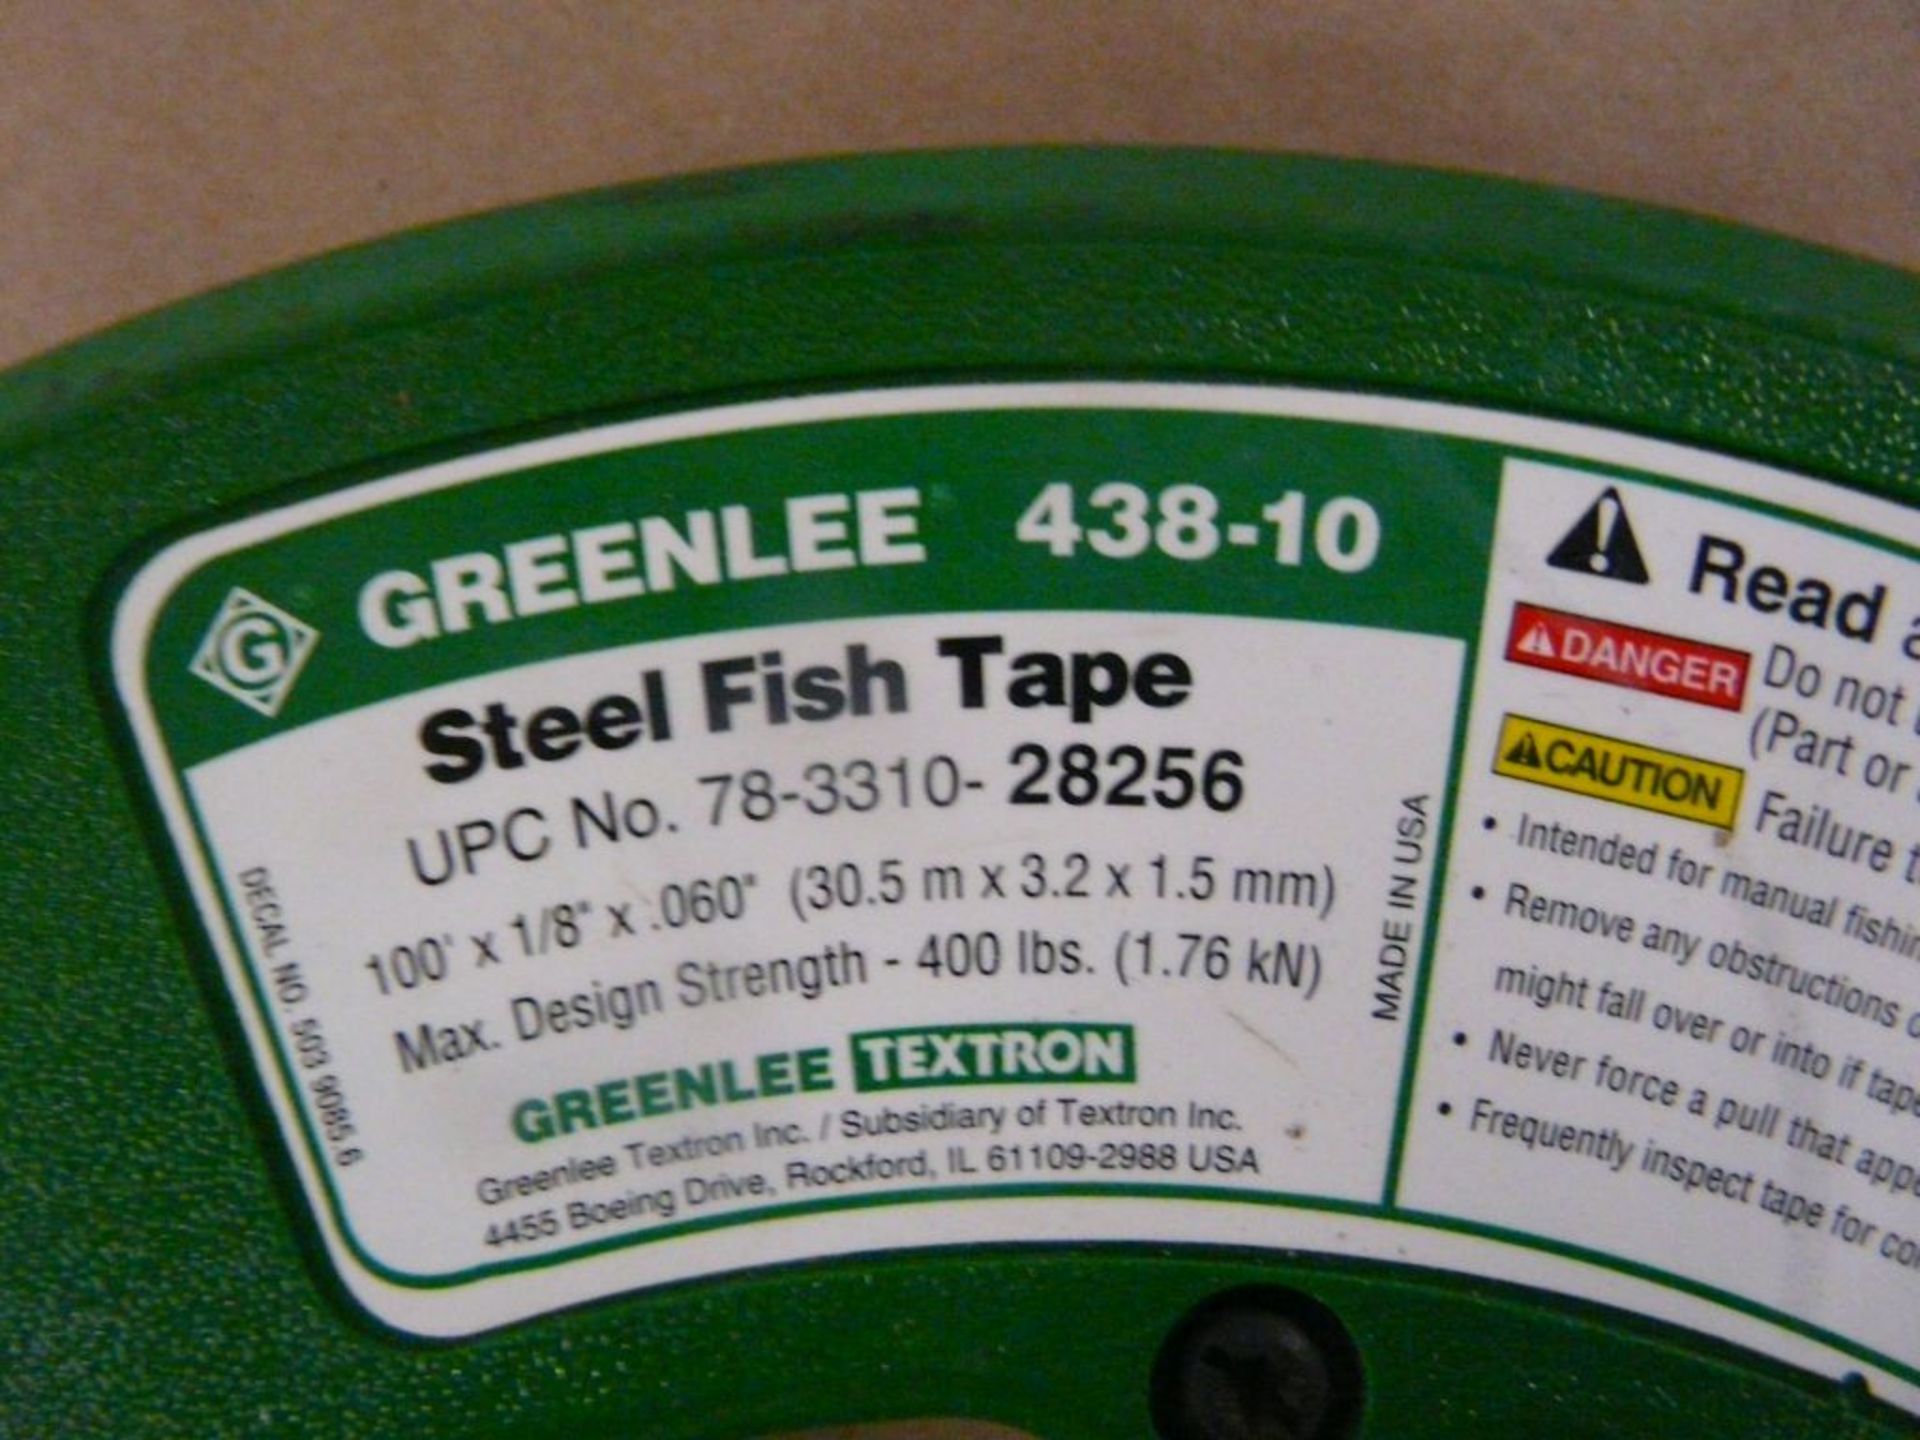 Greenlee Steel Fish Tape|Part No. 438-10 - Image 2 of 2